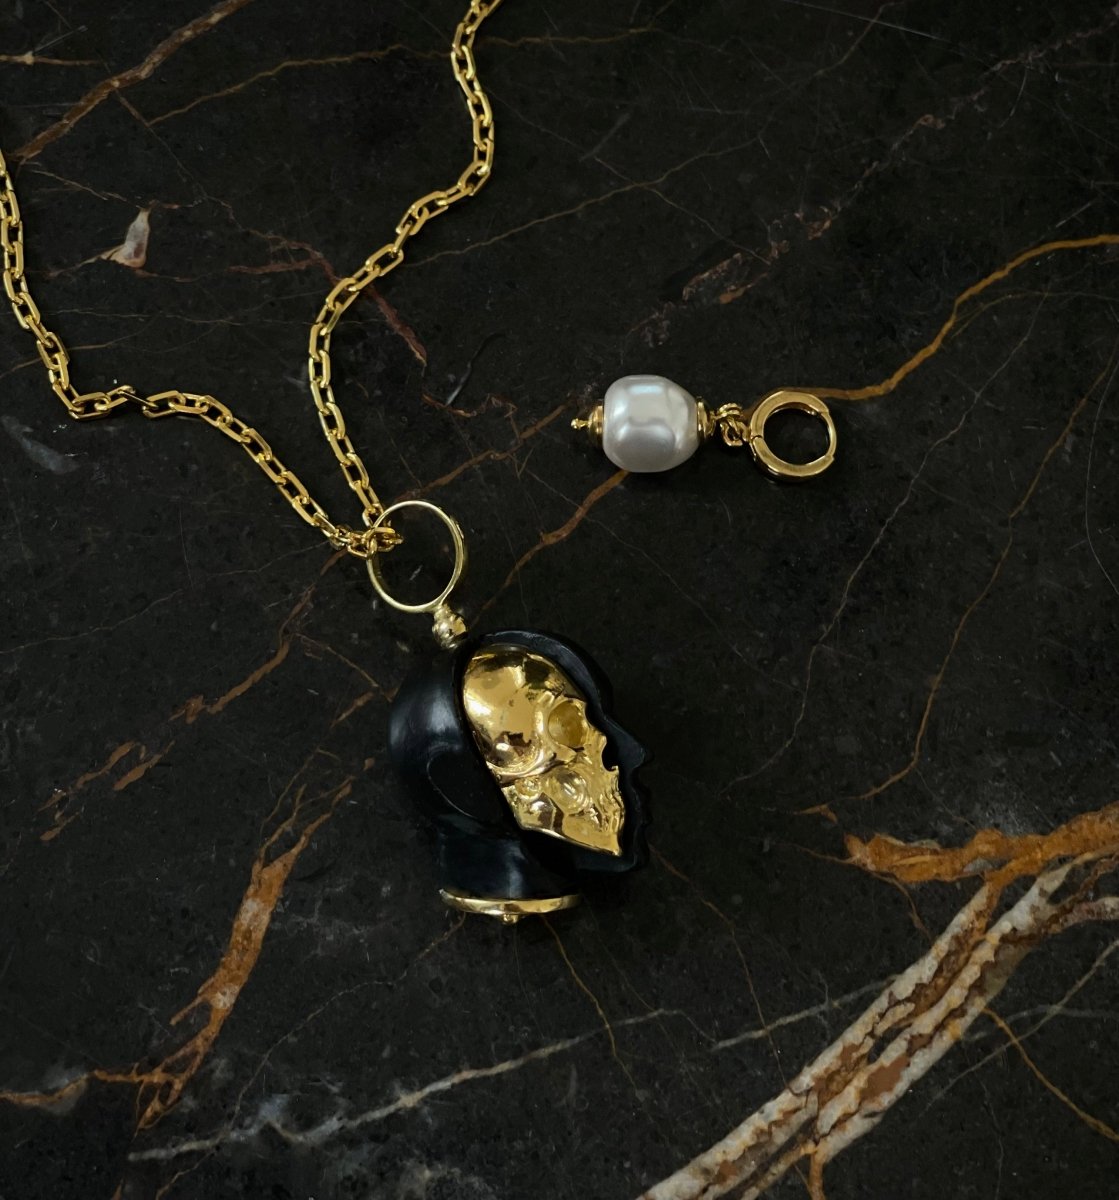 BAROQUE PEARL EARRING - Macabre Gadgets Store